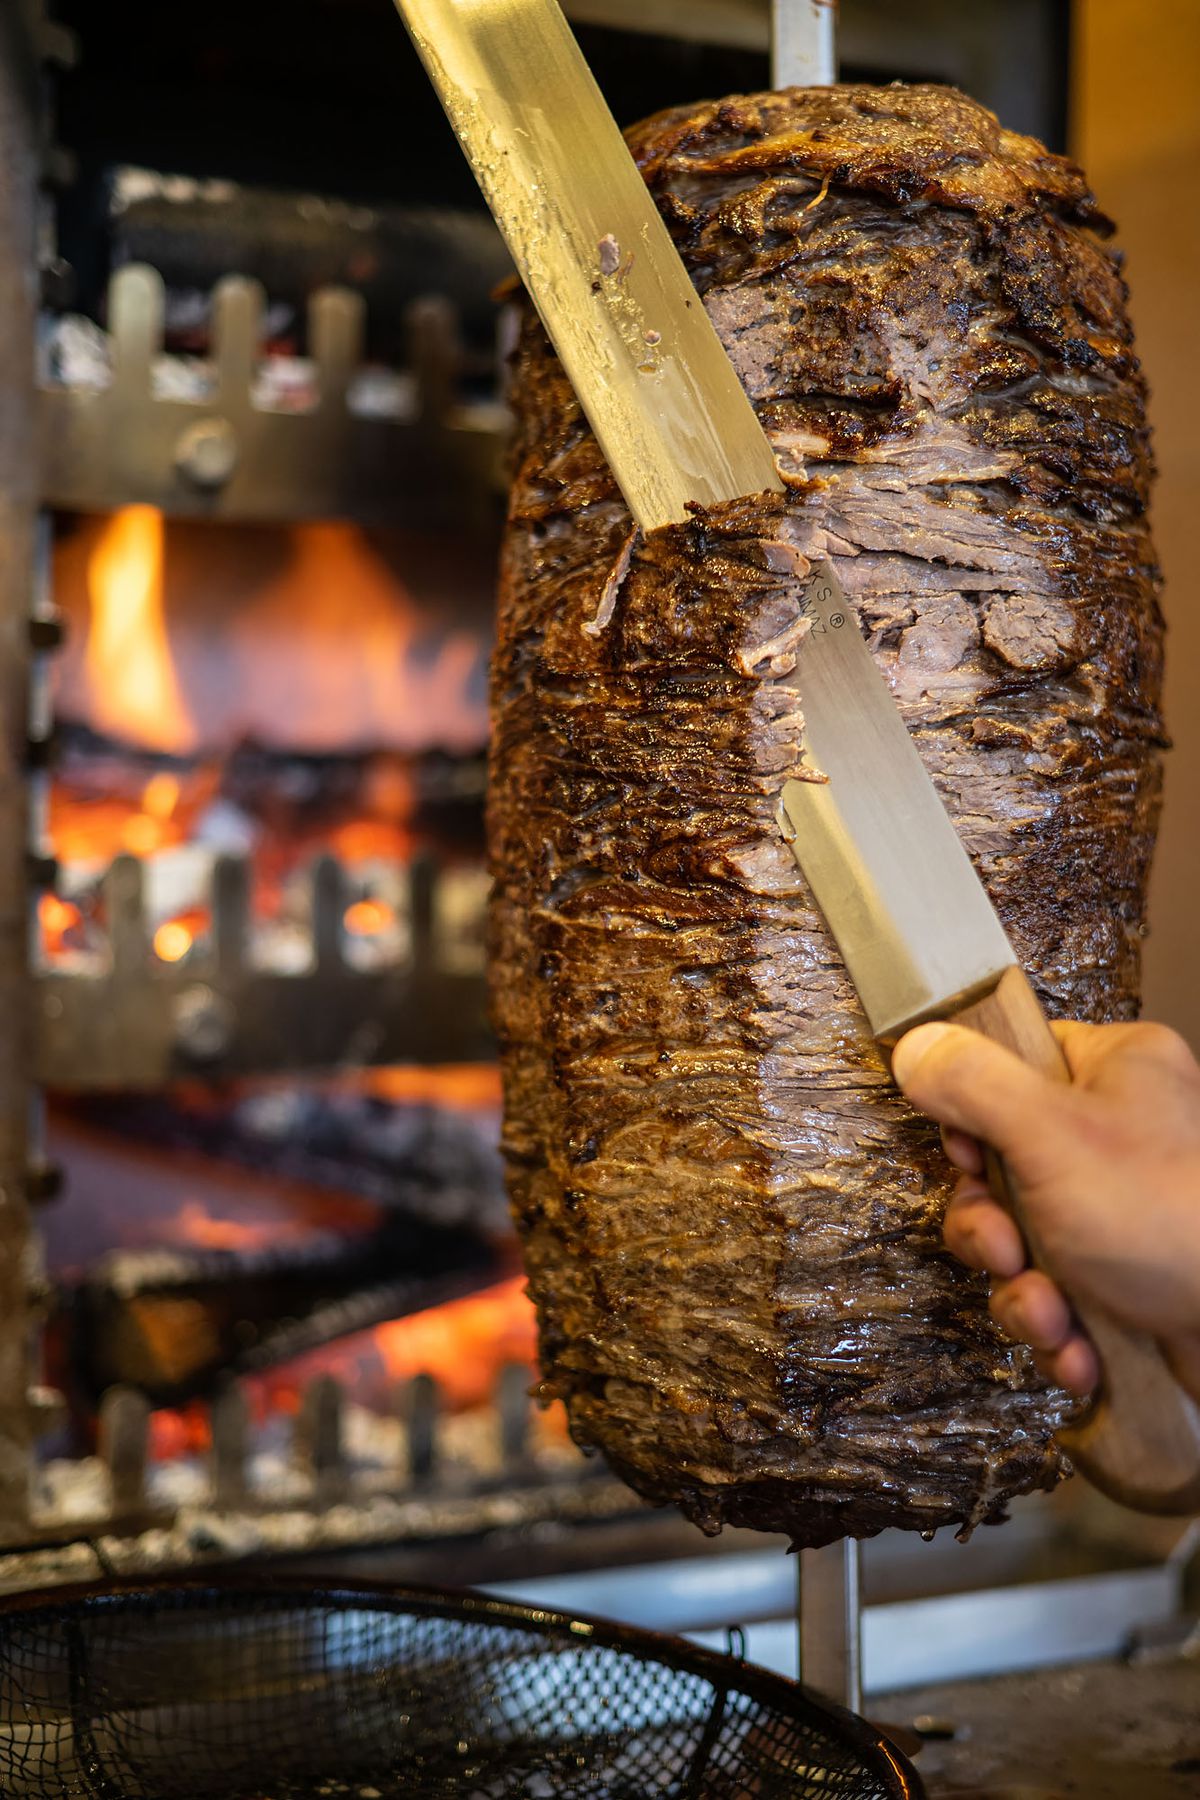 Shaving roasted meat from a vertical spit in a new restaurant.